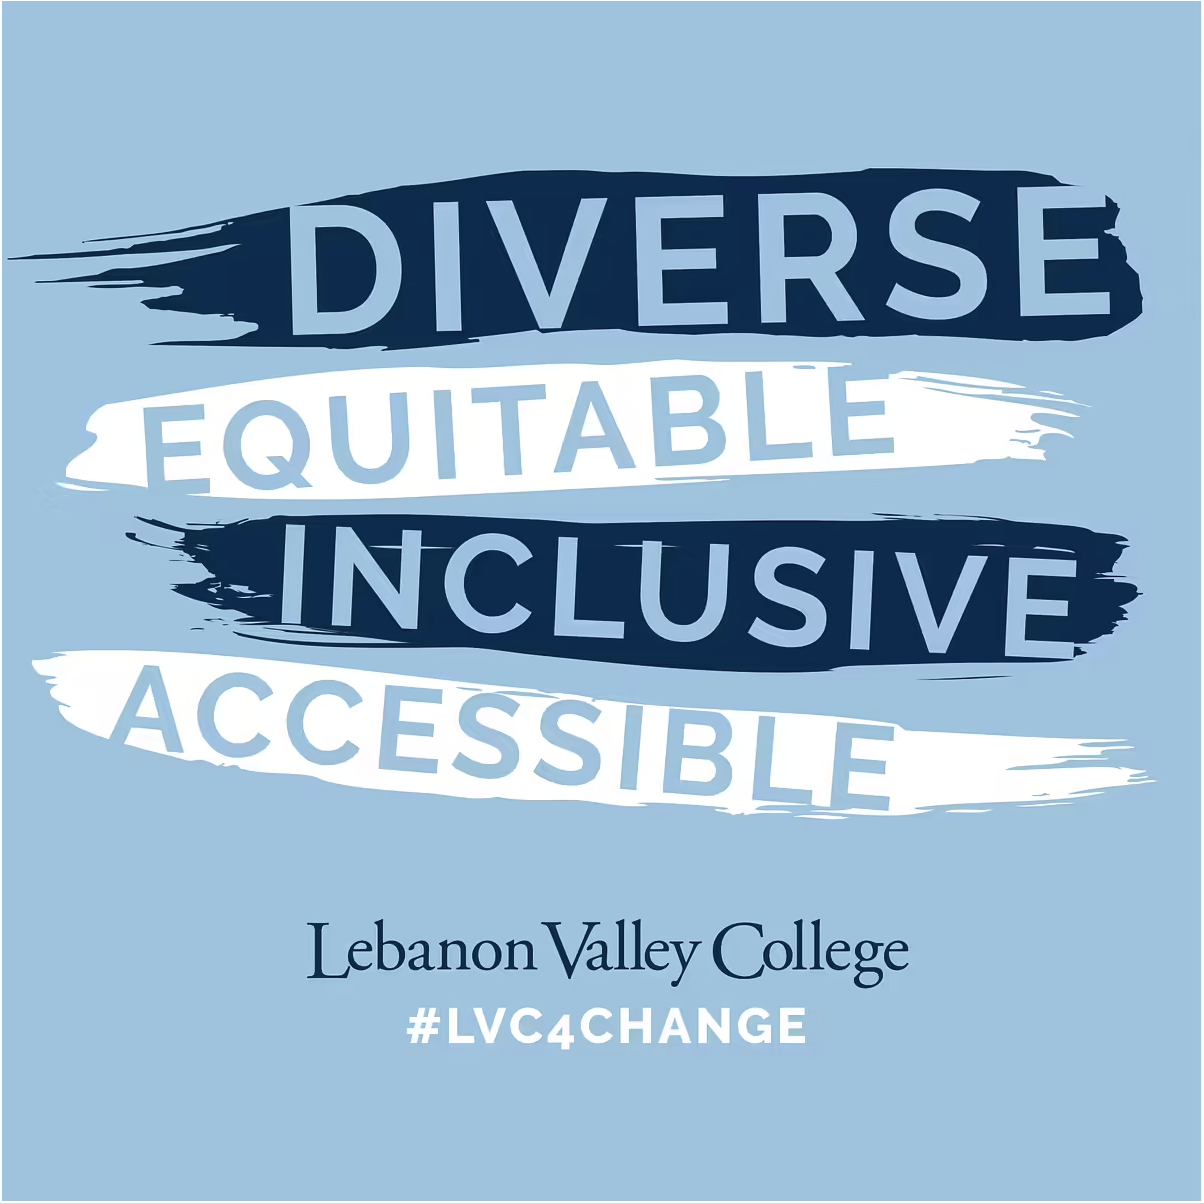 Symposium on Inclusive Excellence shirt design